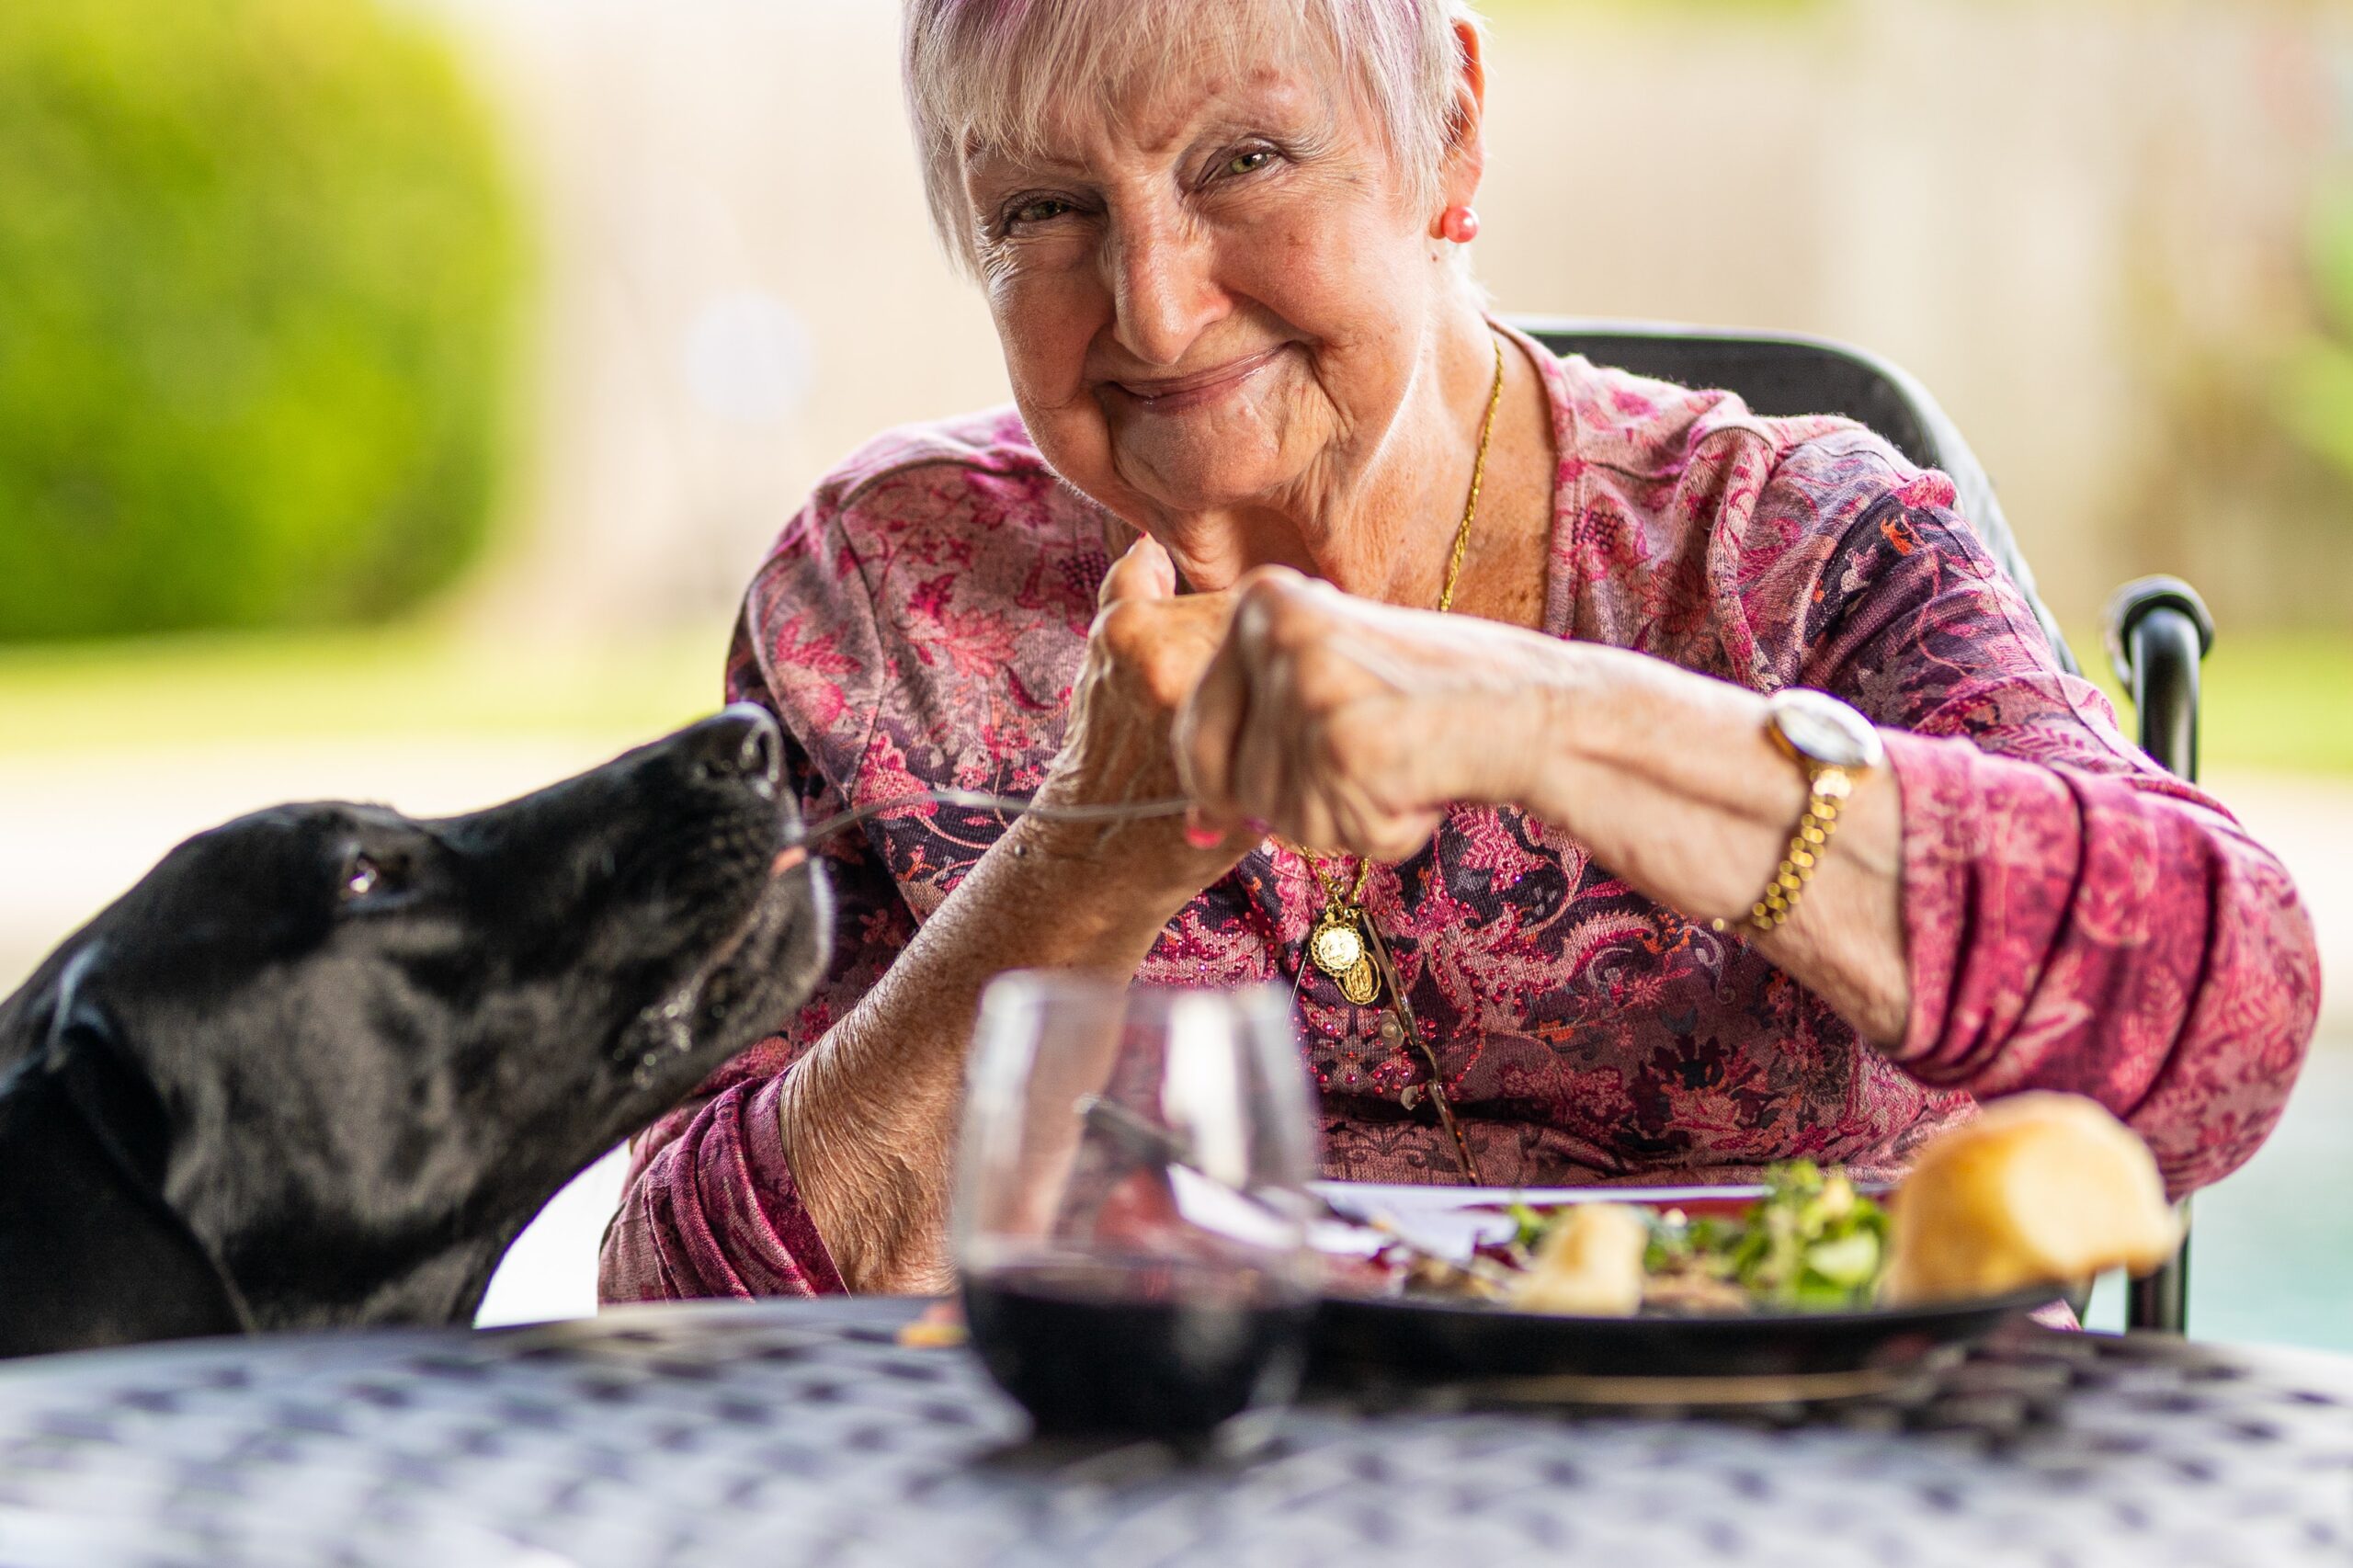 It’s Time for a Dining Culture Change in Skilled Nursing Facilities